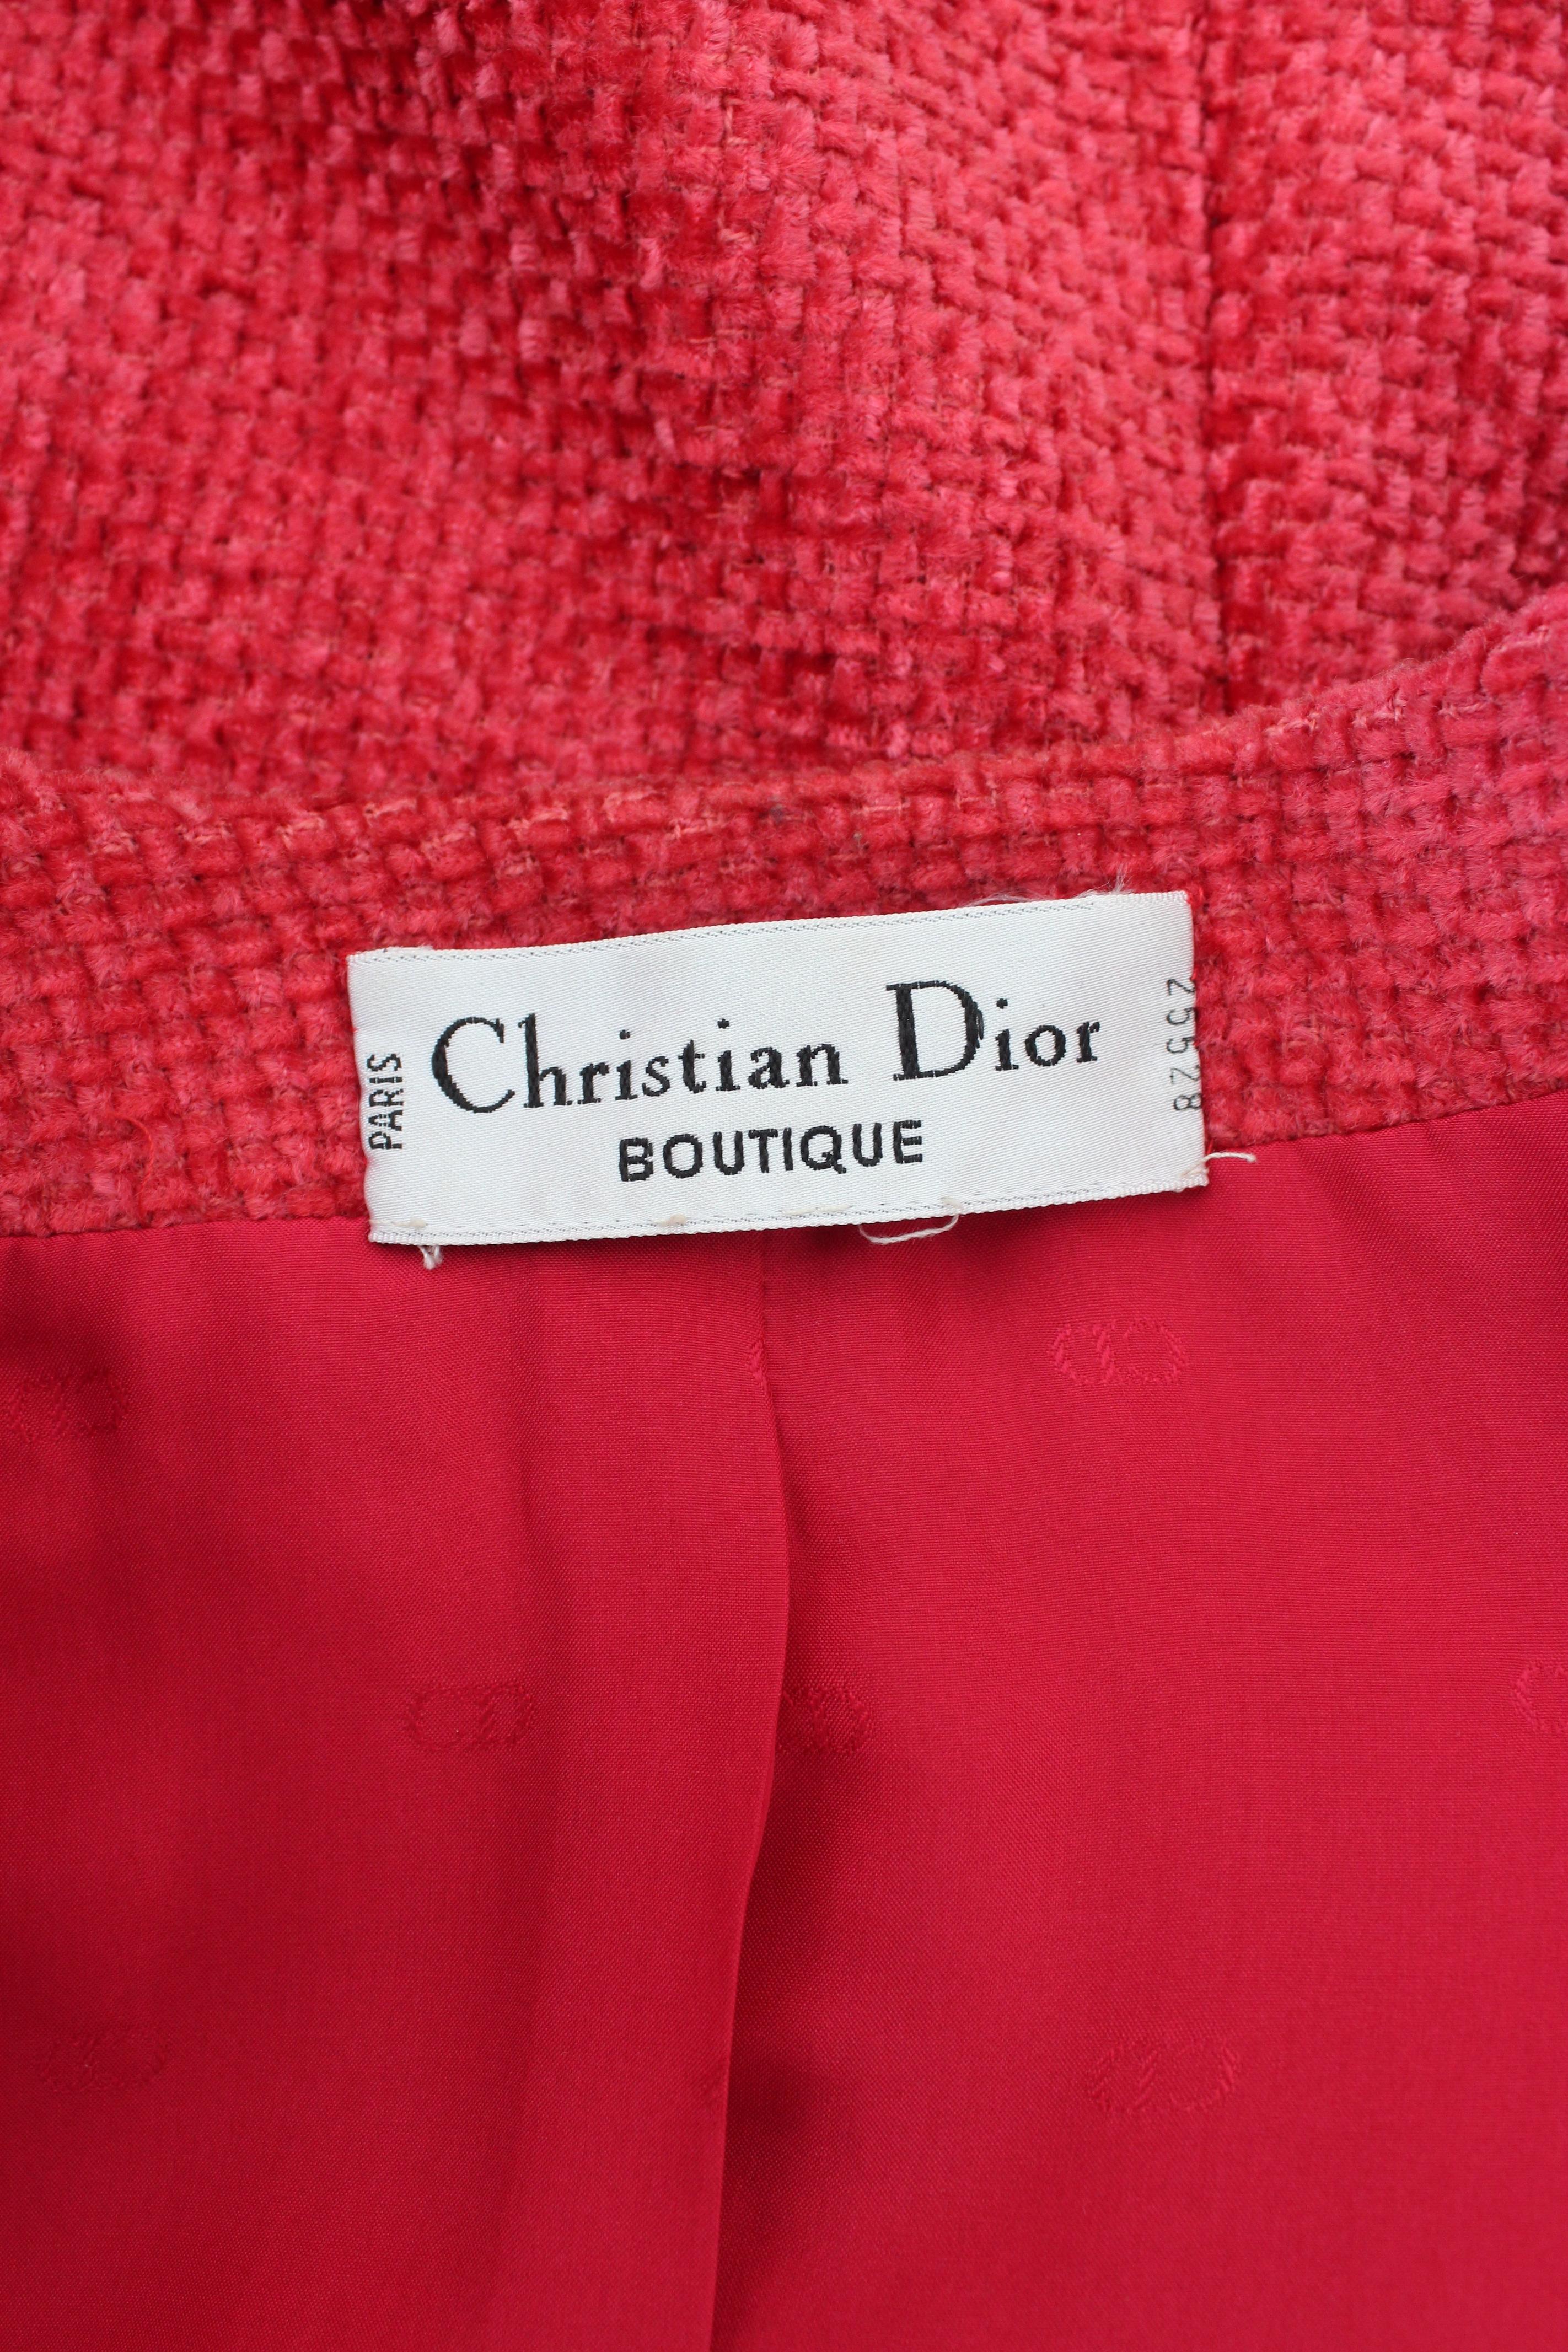 Christian Dior Boutique Red Wool Boucle Evening Blazer 1980s 3